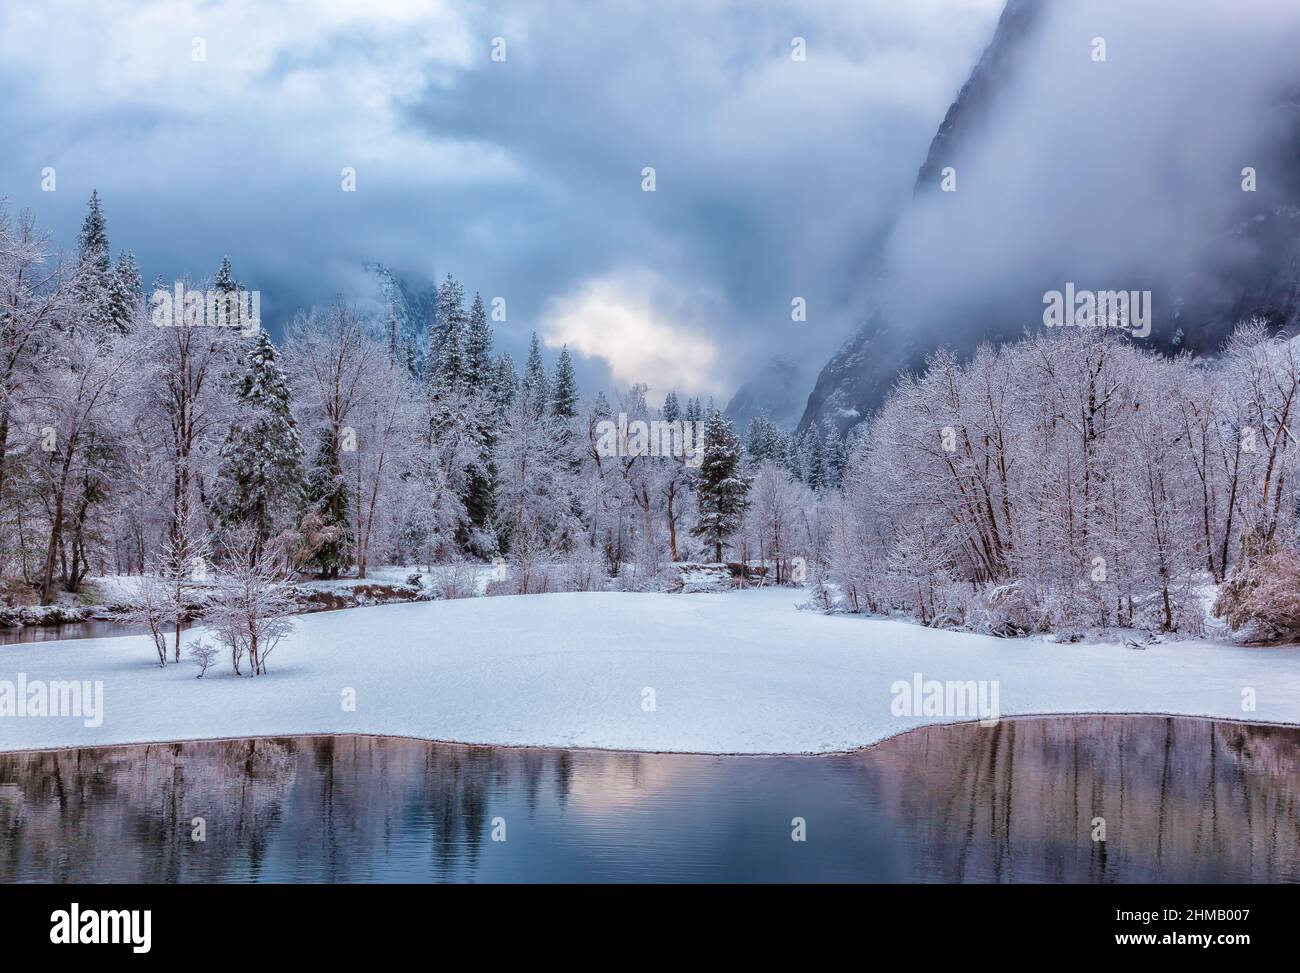 Fresh new snow blanket the landscapes by Merced River after an early winter storm in Yosemite National Park, California, USA. Stock Photo